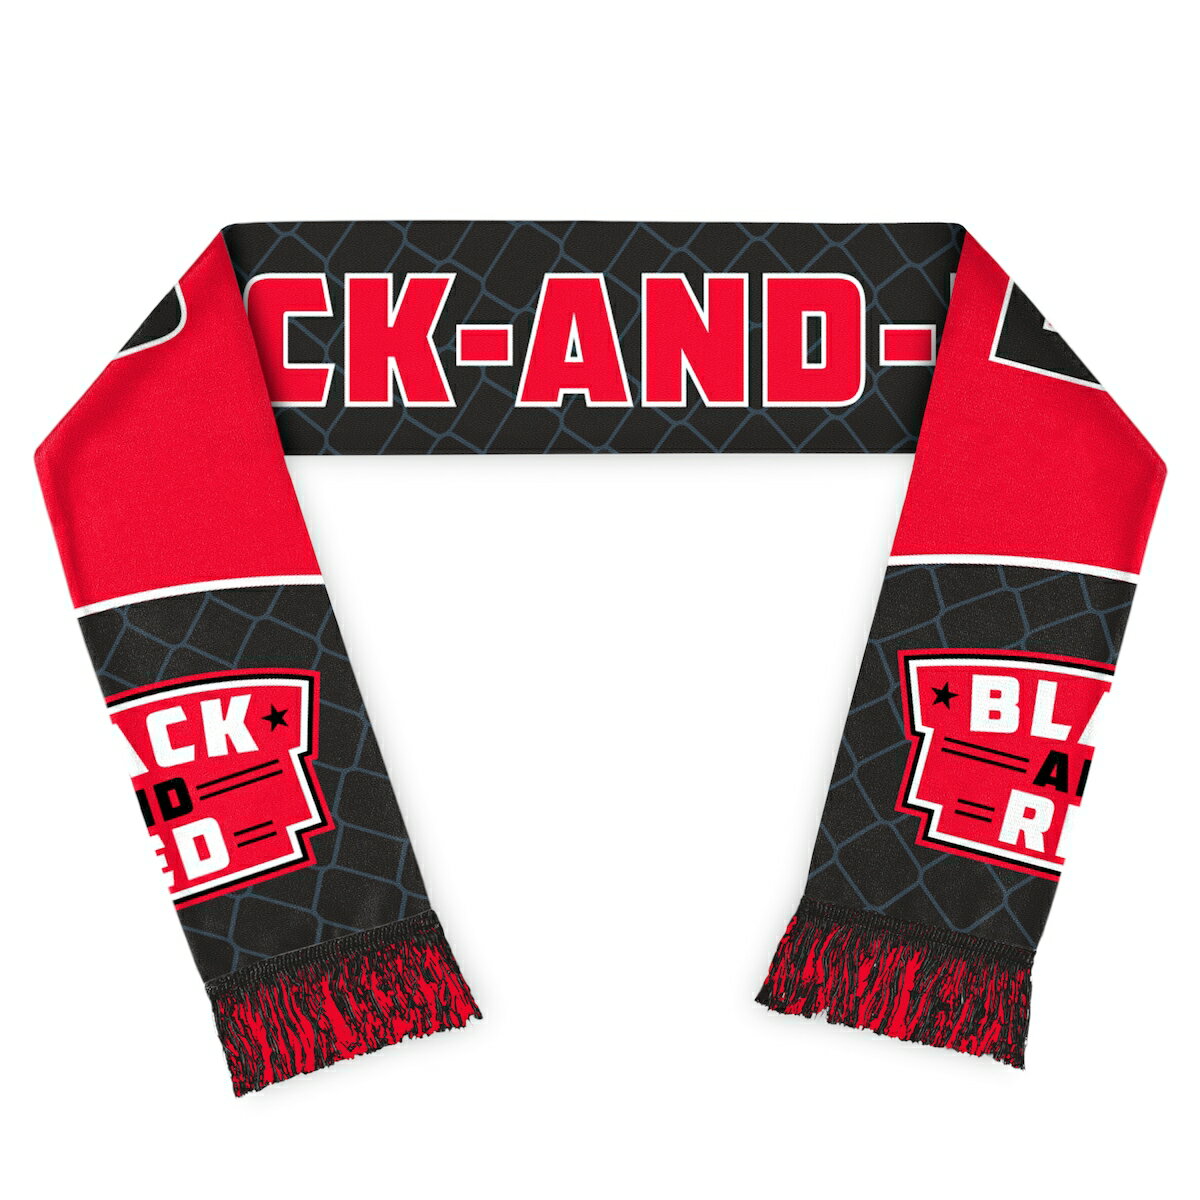 Enjoy added neck warmth and a boost of D.C. United spirit on cooler match days by grabbing this two-pack scarf set from Fanatics Branded. The fringed ends on both of these complementary scarves give any club-inspired ensemble the perfect finishing touches.Hand wash, line dryOfficially licensedWoven graphicsMaterial: 100% AcrylicImportedBrand: Fanatics BrandedMeasures approx. 68'' x 7.25'' (includes fringe)